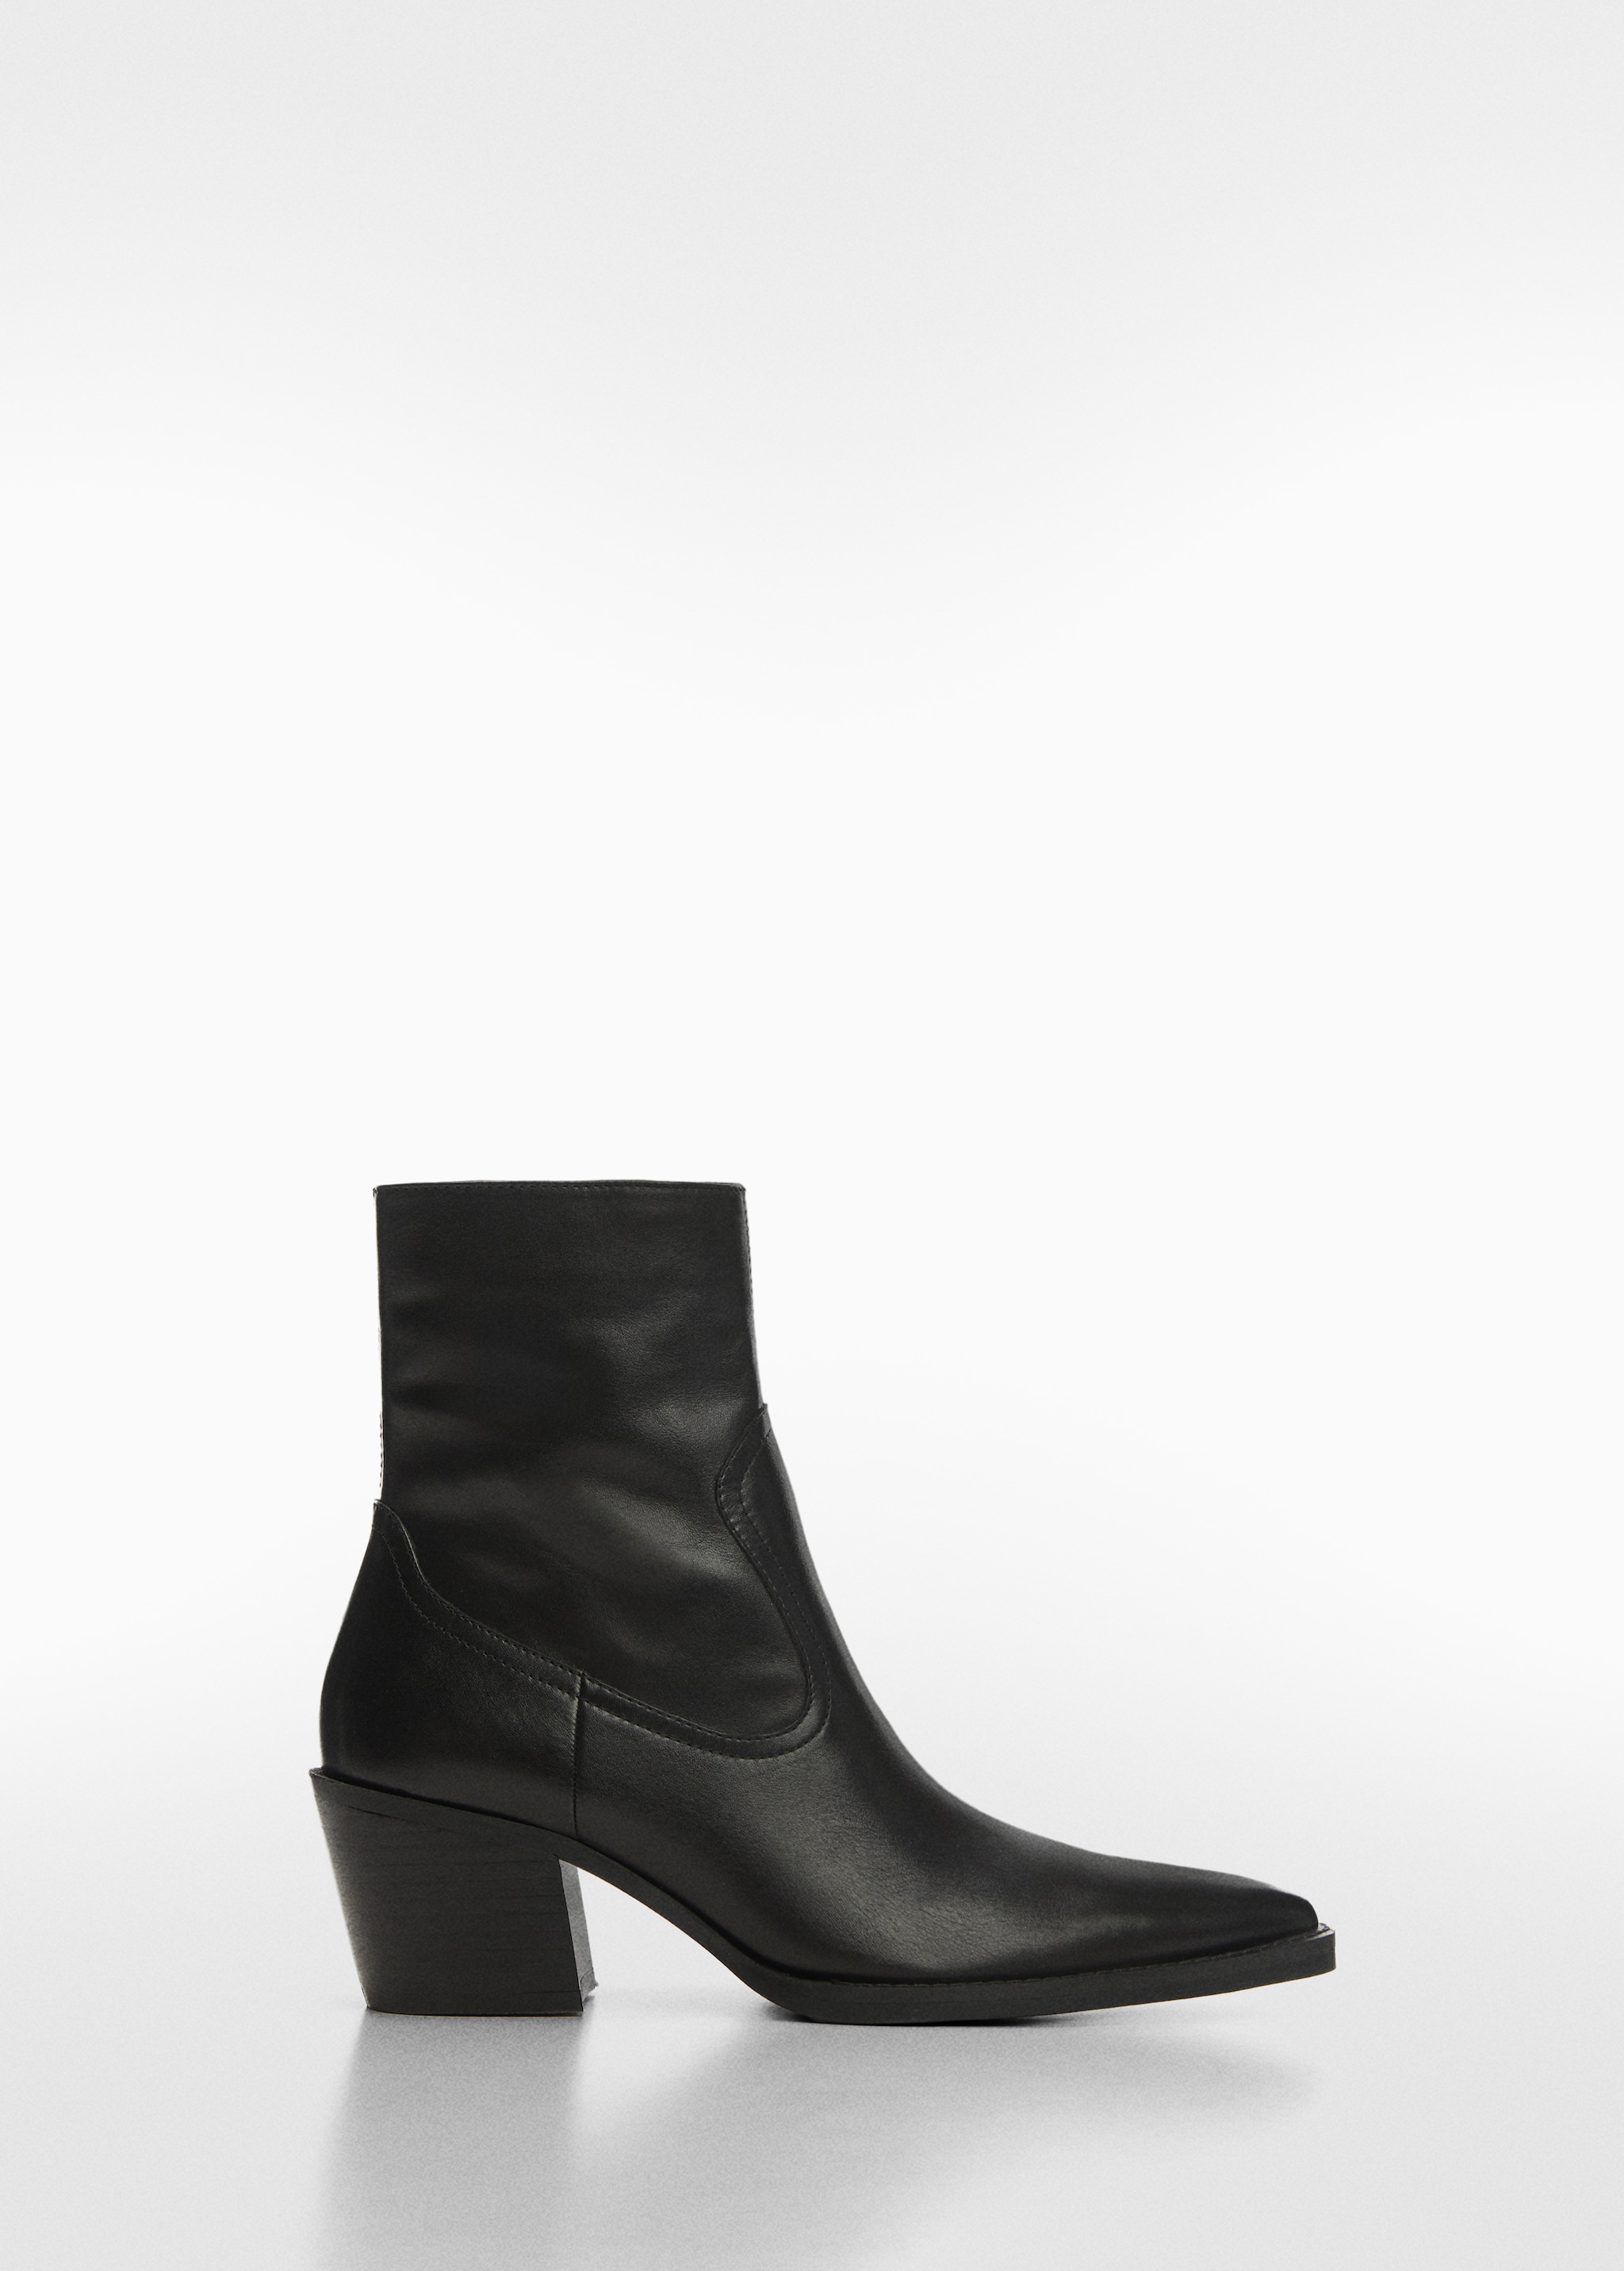 Leather pointed ankle boots - Article without model